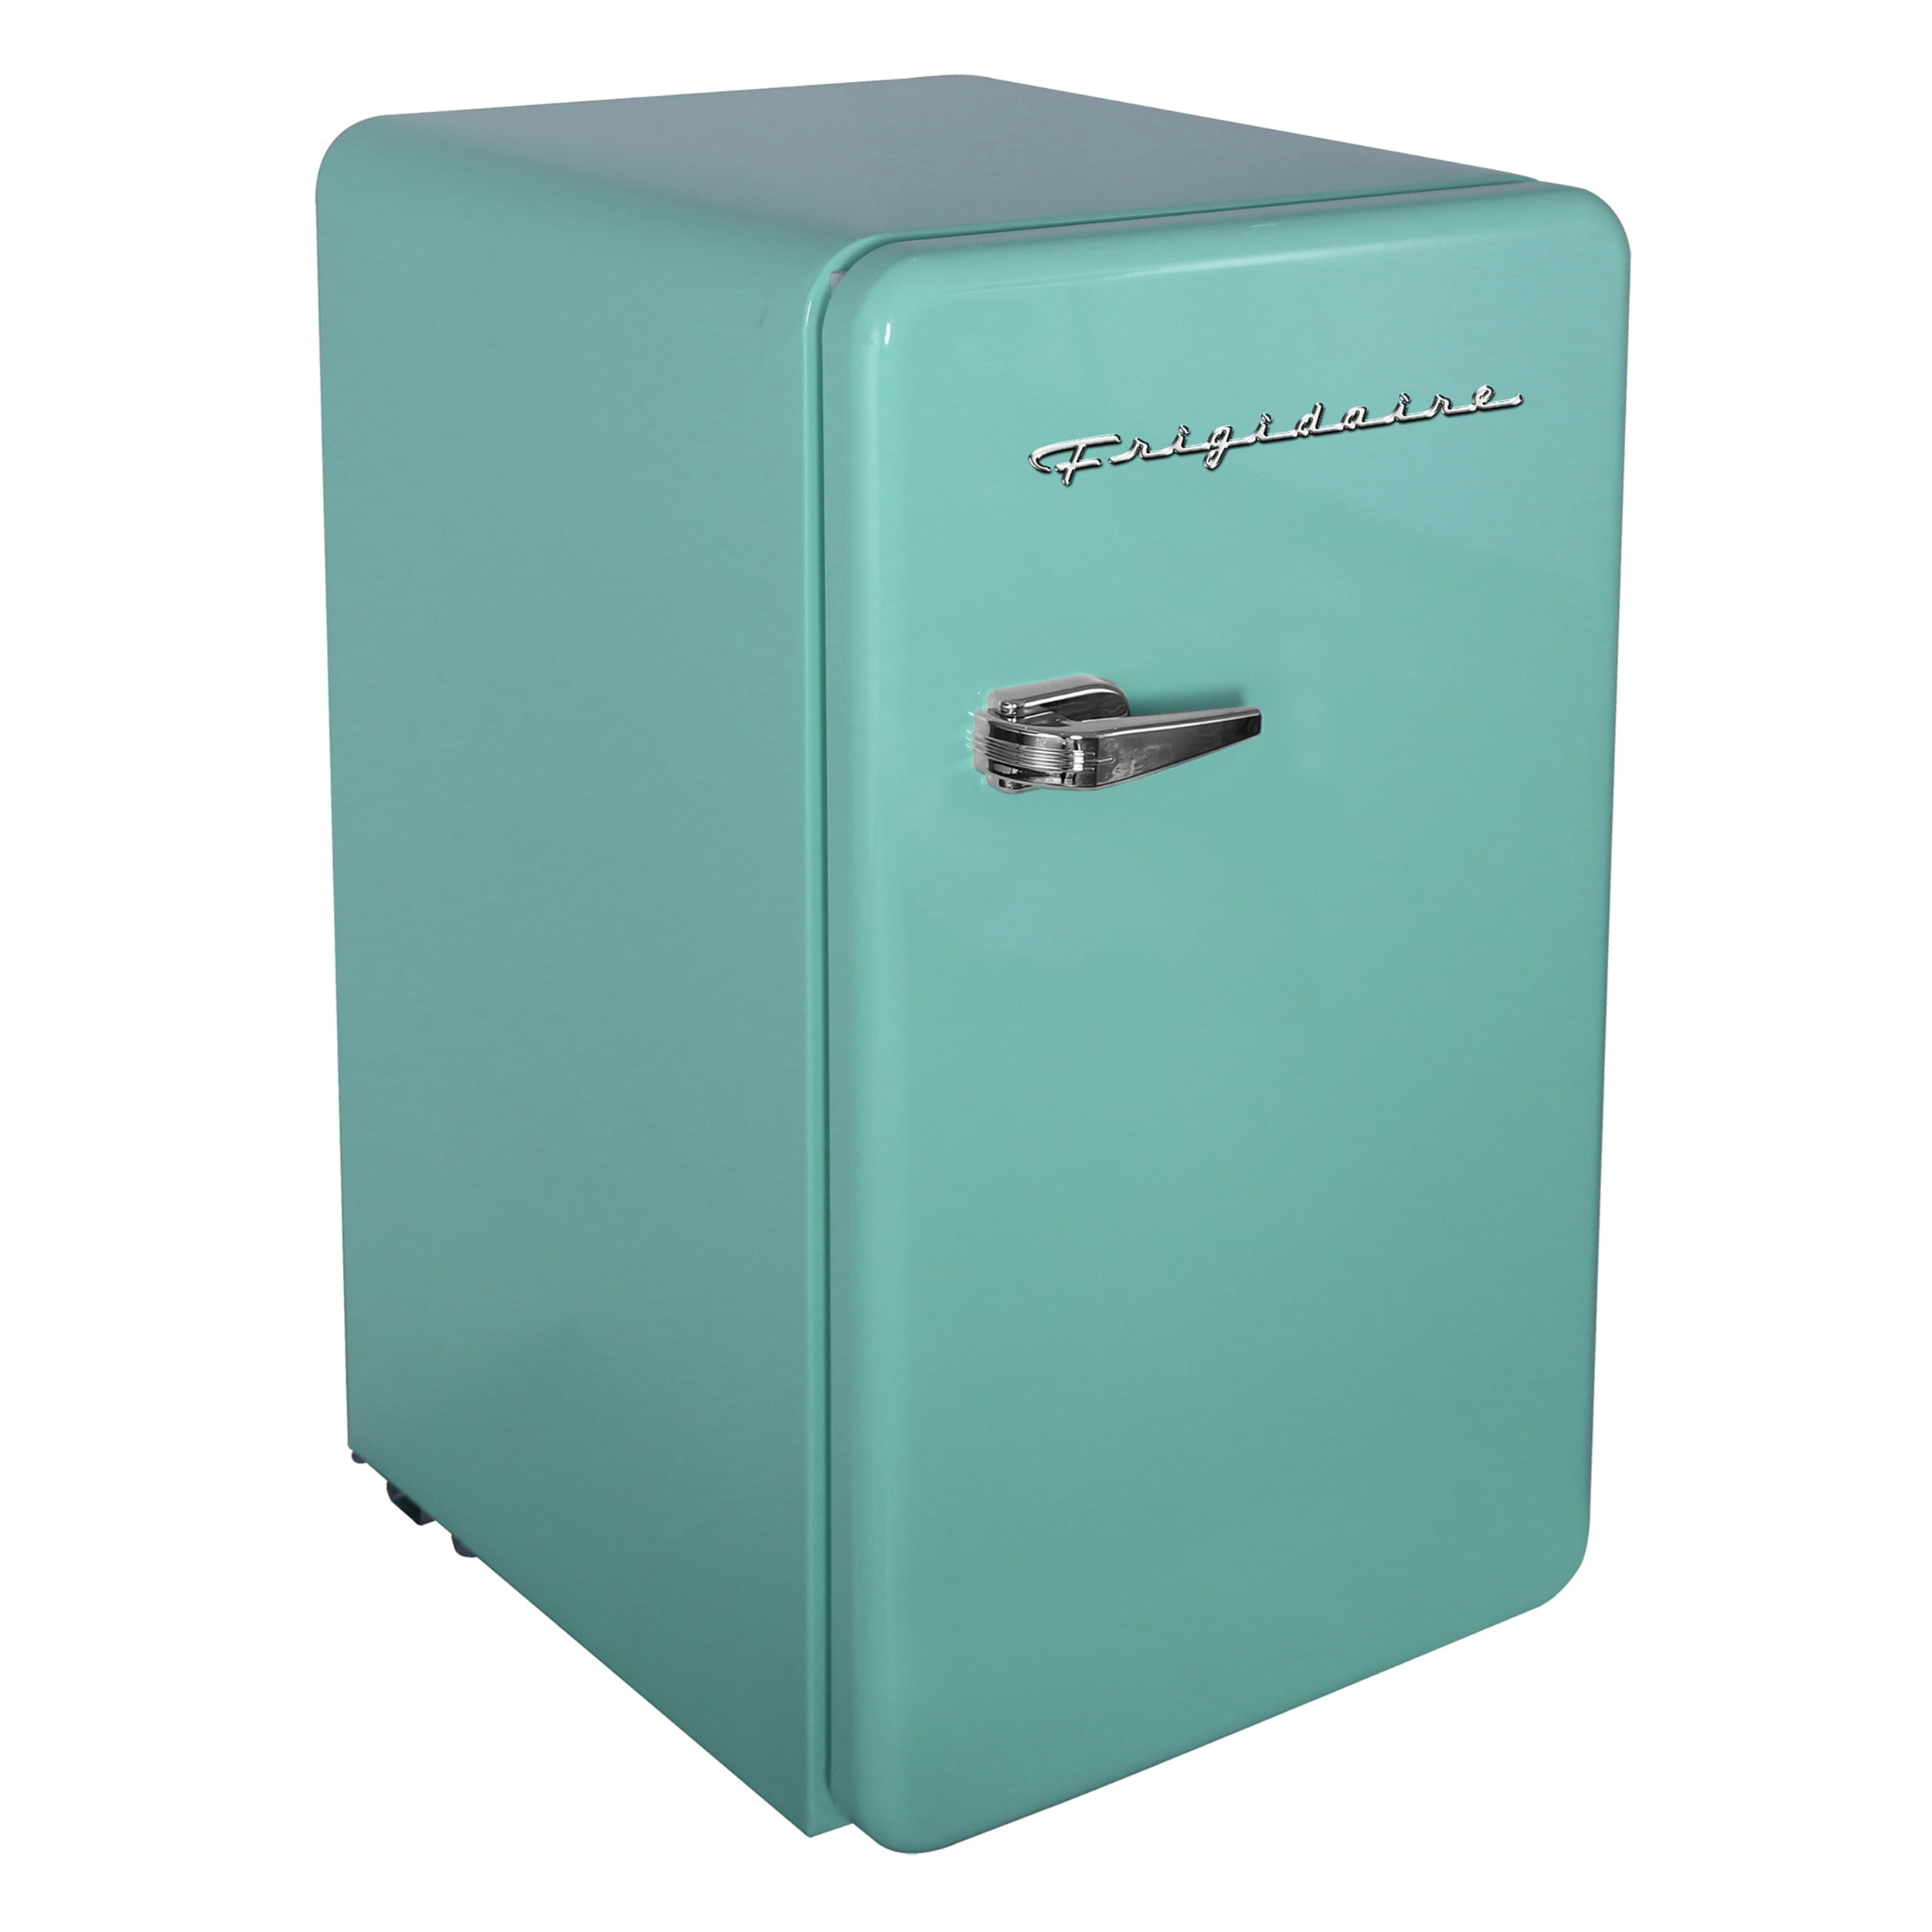 New and used Retro Refrigerators for sale